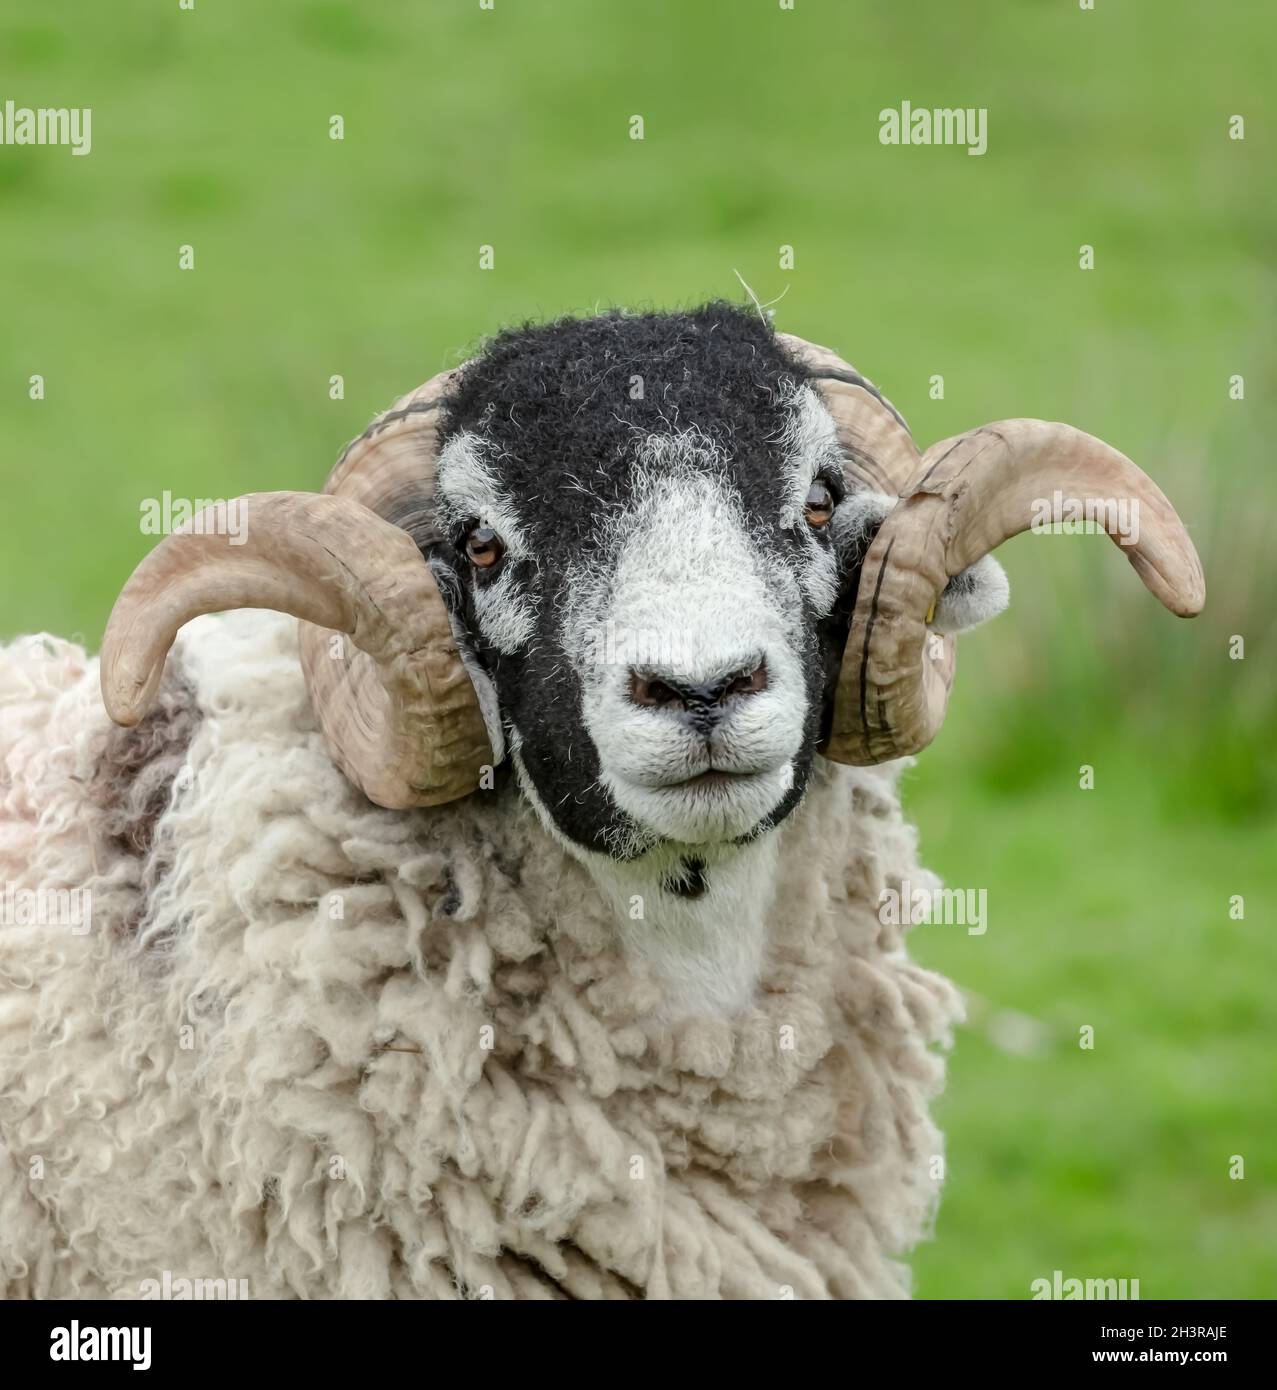 Portrait of a fine Swaledale Ram or male sheep with two curly horns.  Facing camera,  close up.  Clean, green background.  Copy space. Stock Photo